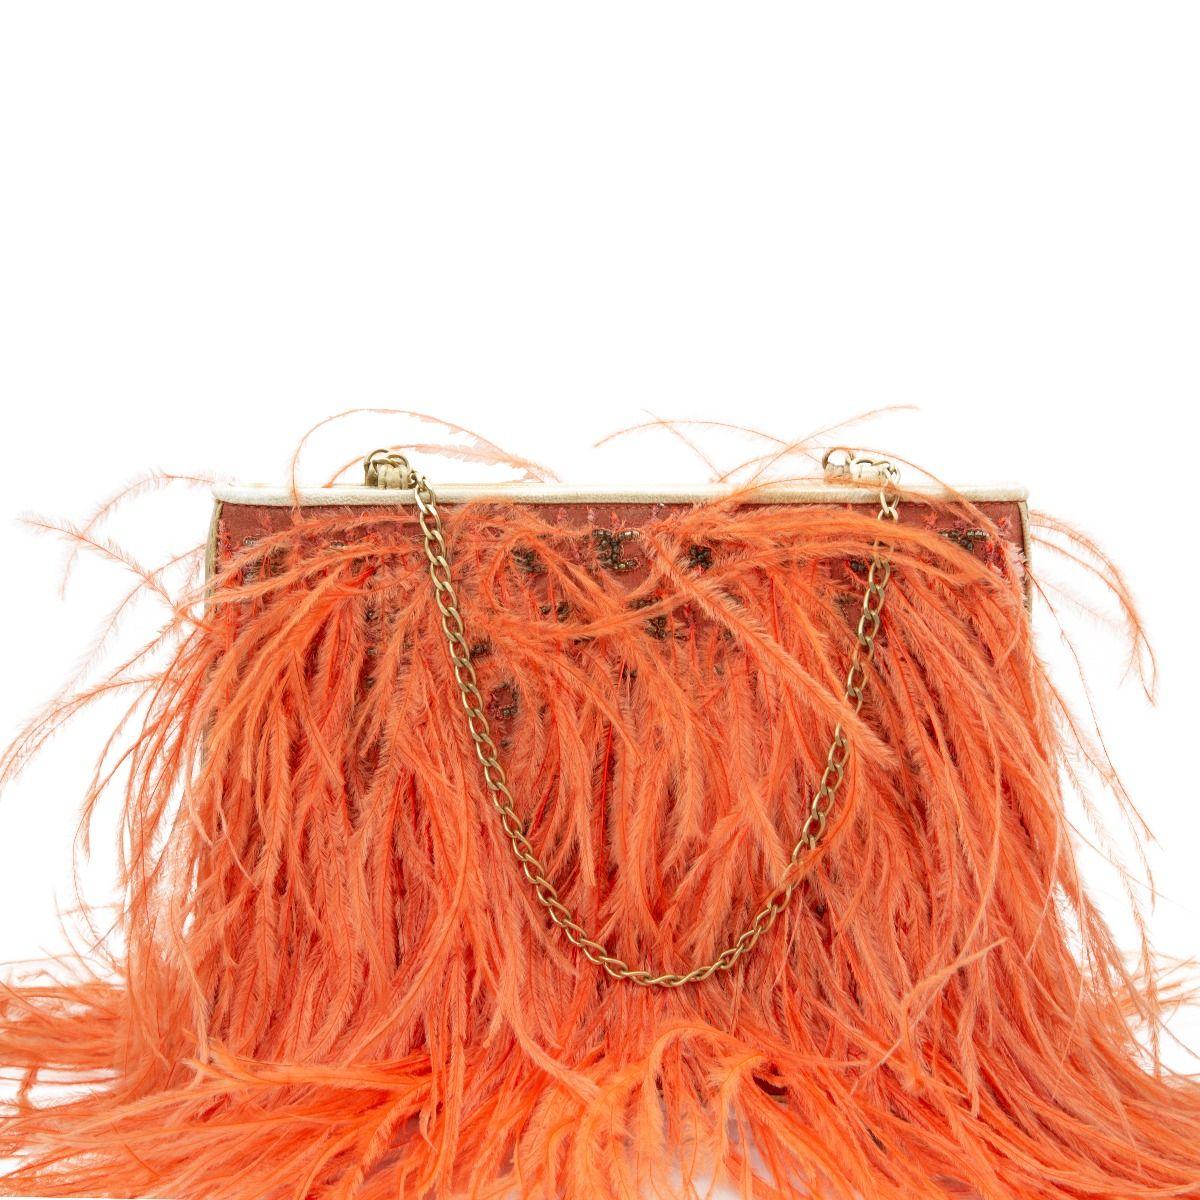 Covered in an array of wispy feathers to create a beautiful movement, This pre-owned Chanel clutch from the years 2000- 2002 is the perfect accessory for a glamorous night out. Sized for just essentials, this beautiful bag features metallic gold